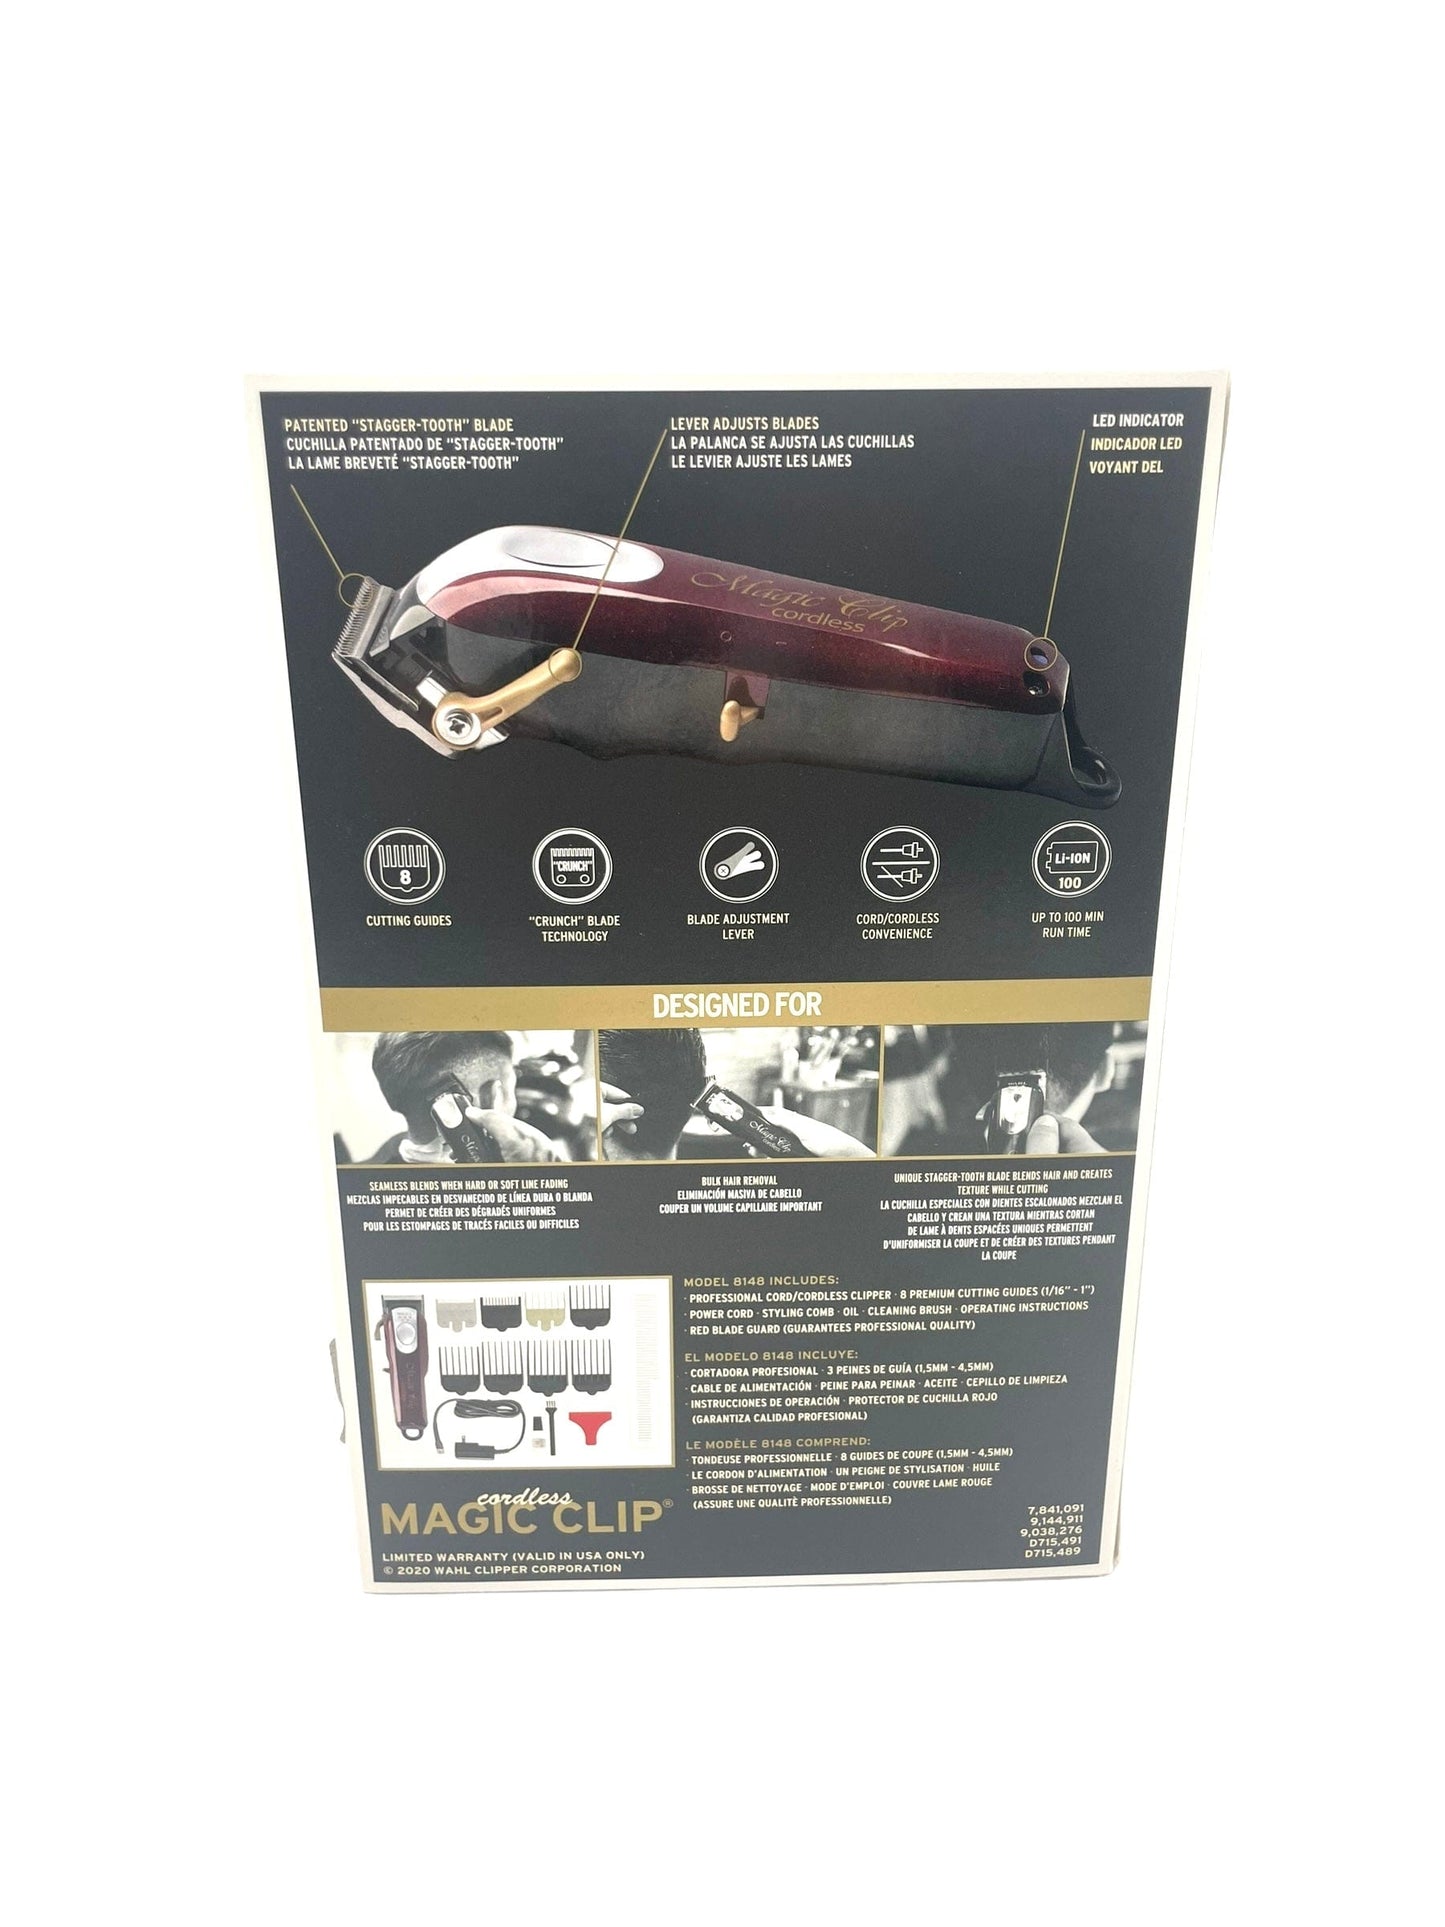 Wahl Professional 5 Star Series Magic Clip Cord/Cordless Clipper #08148 Hair Clippers & Trimmers